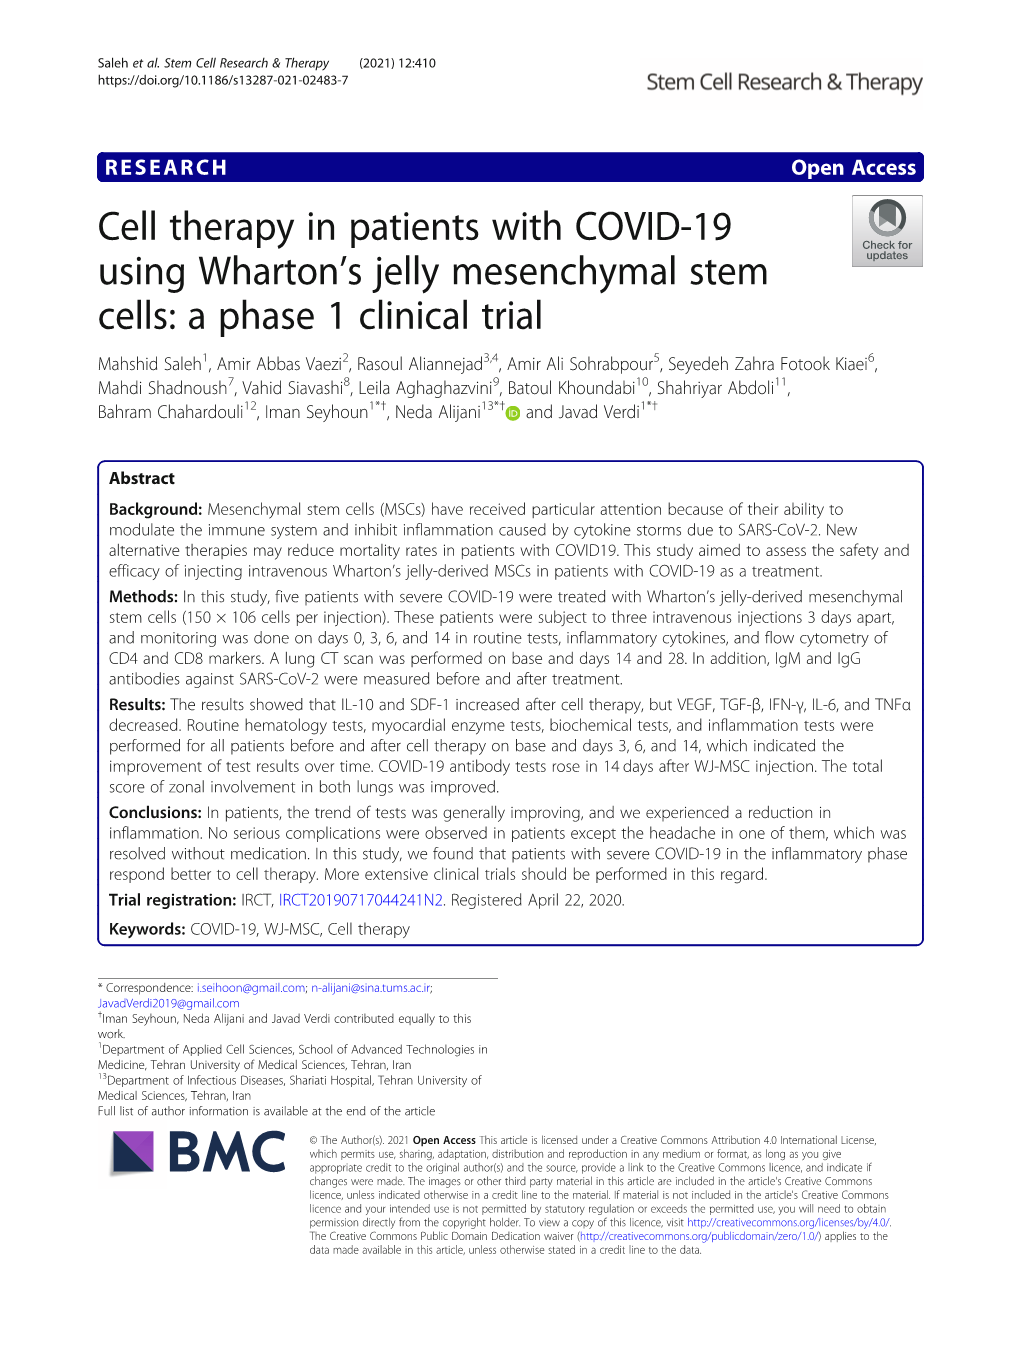 Cell Therapy in Patients with COVID